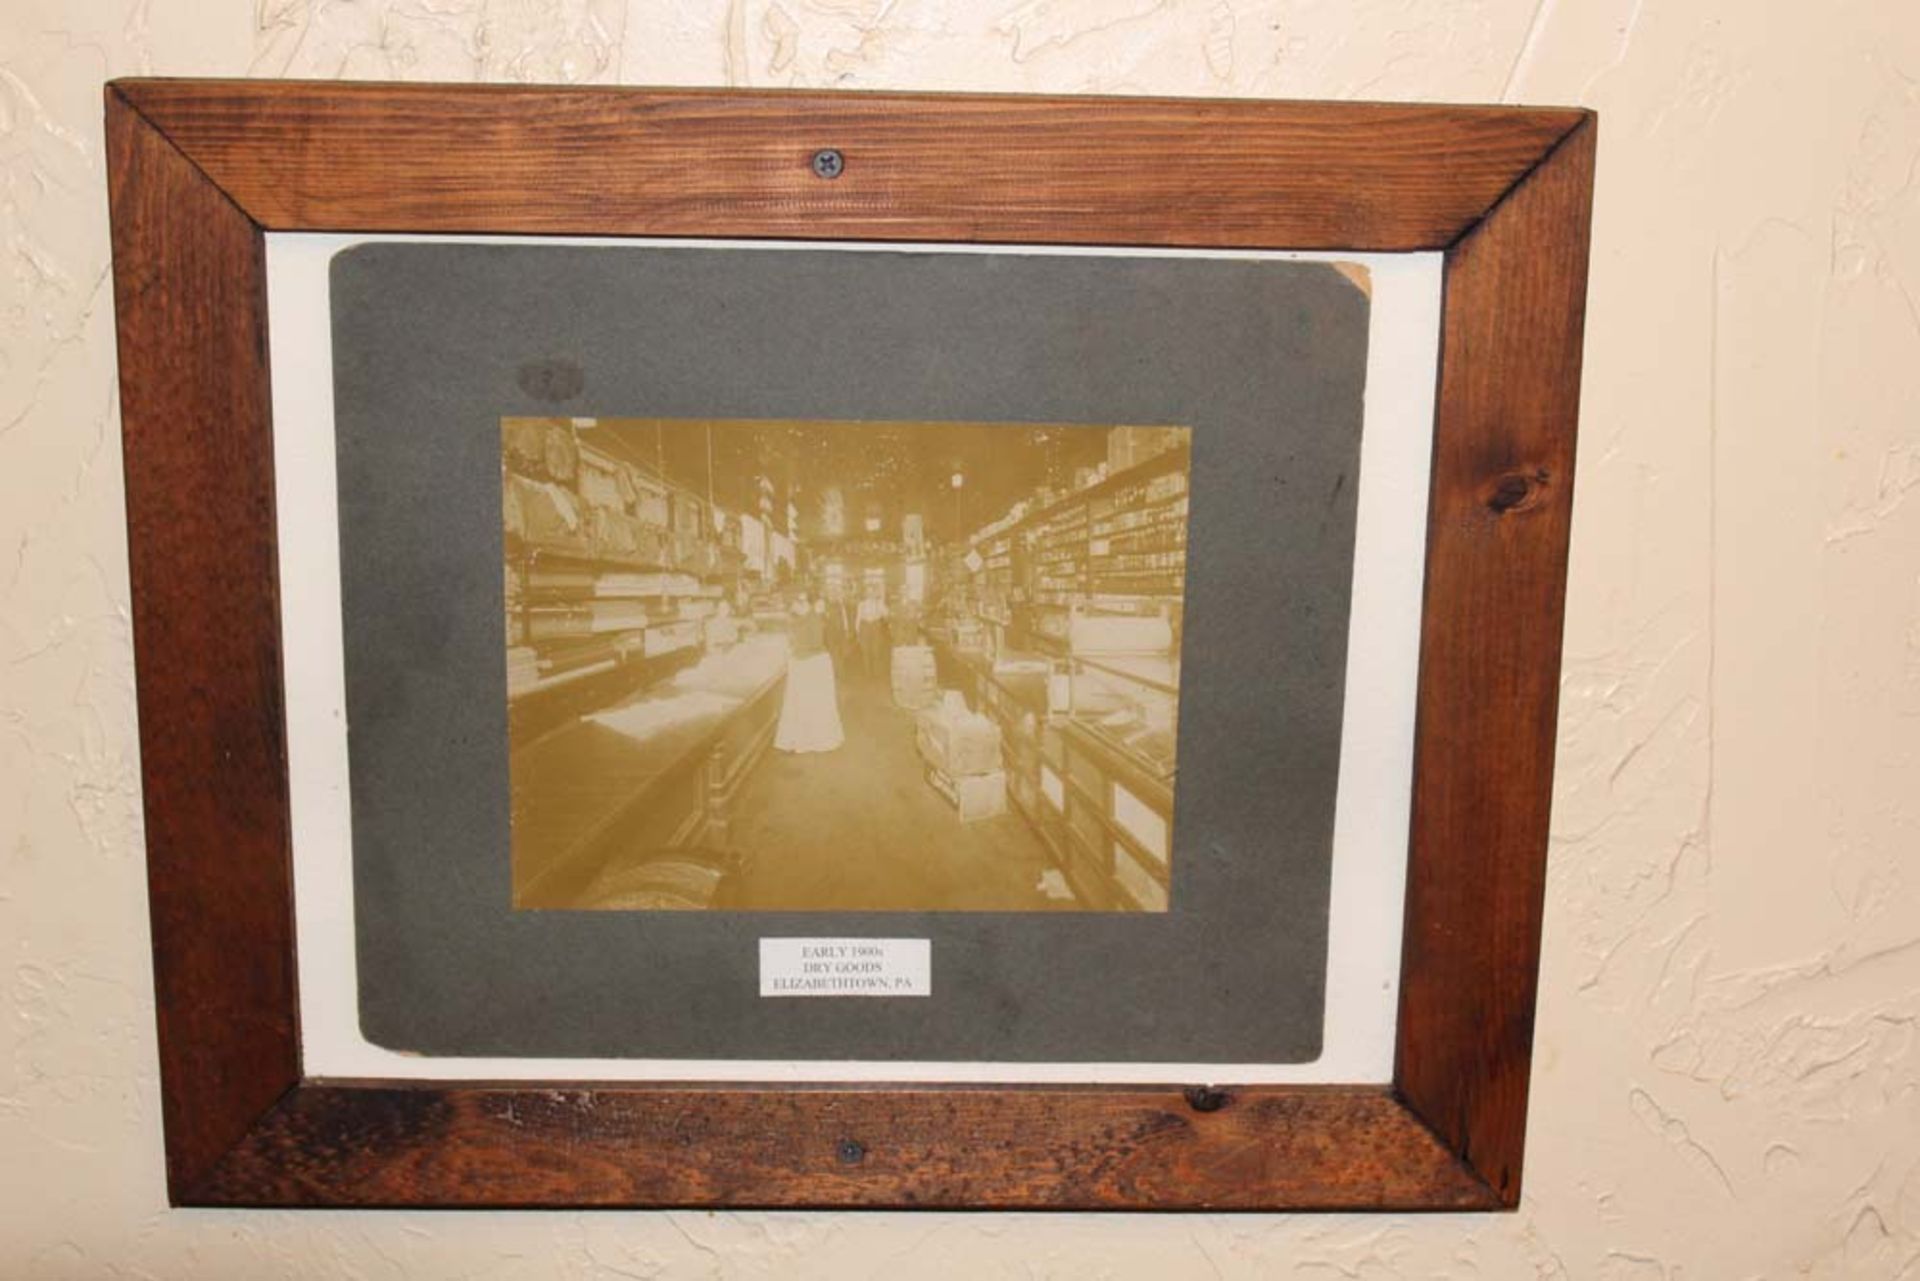 Memorabilia; Pretzels Sign, Shoe Forms, Dry Goods, DH Martin, Early 1900's, Switch Board Photo, - Image 5 of 10